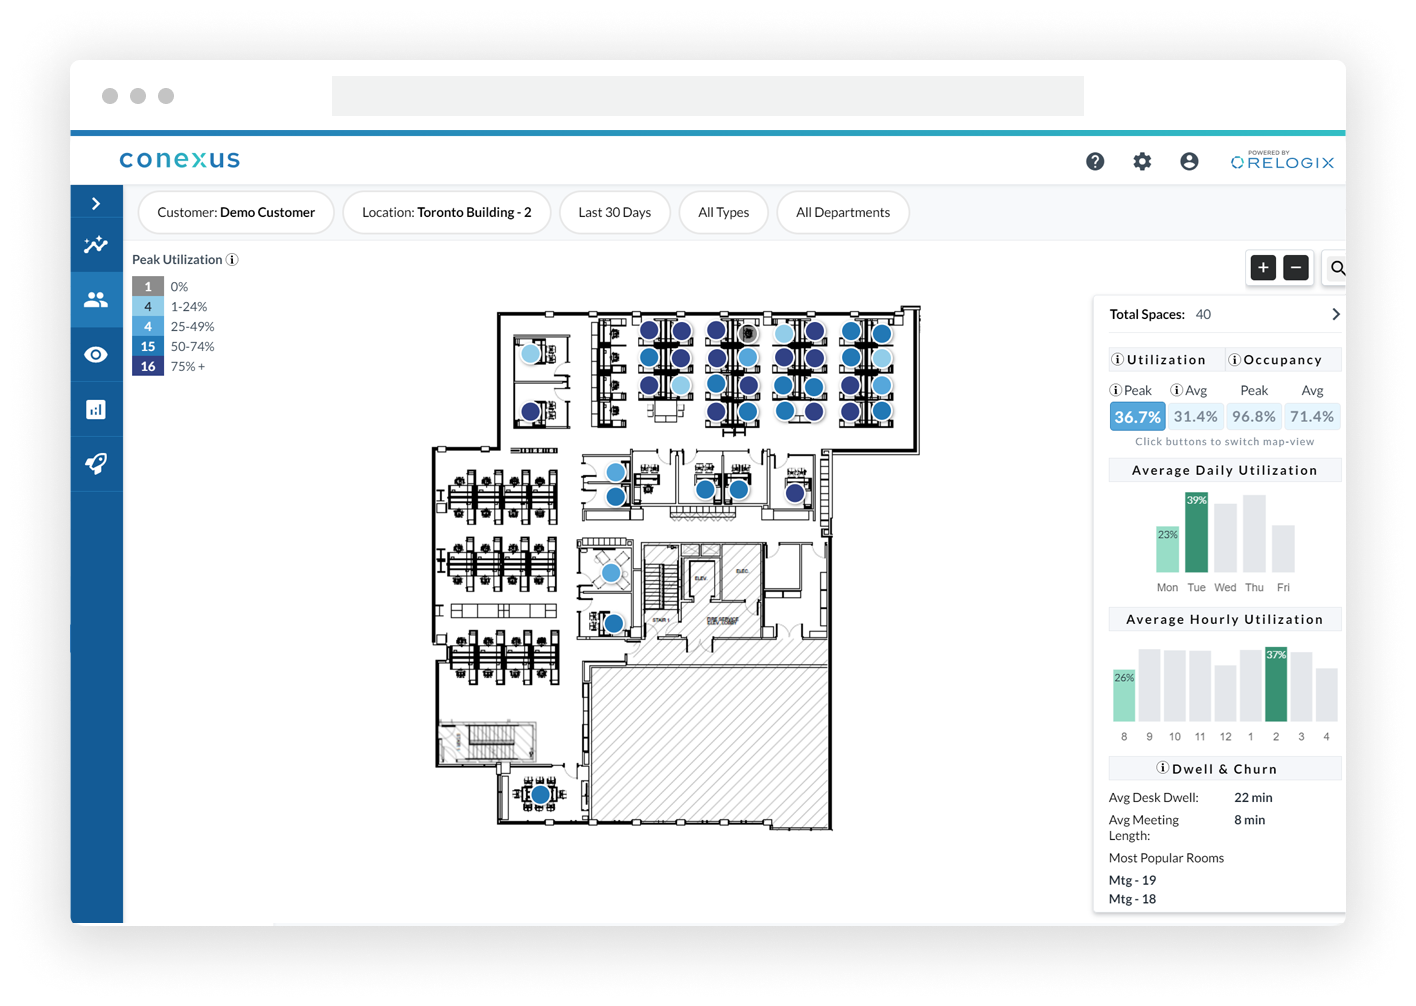 Conexus spaces occupancy analytics by relogix